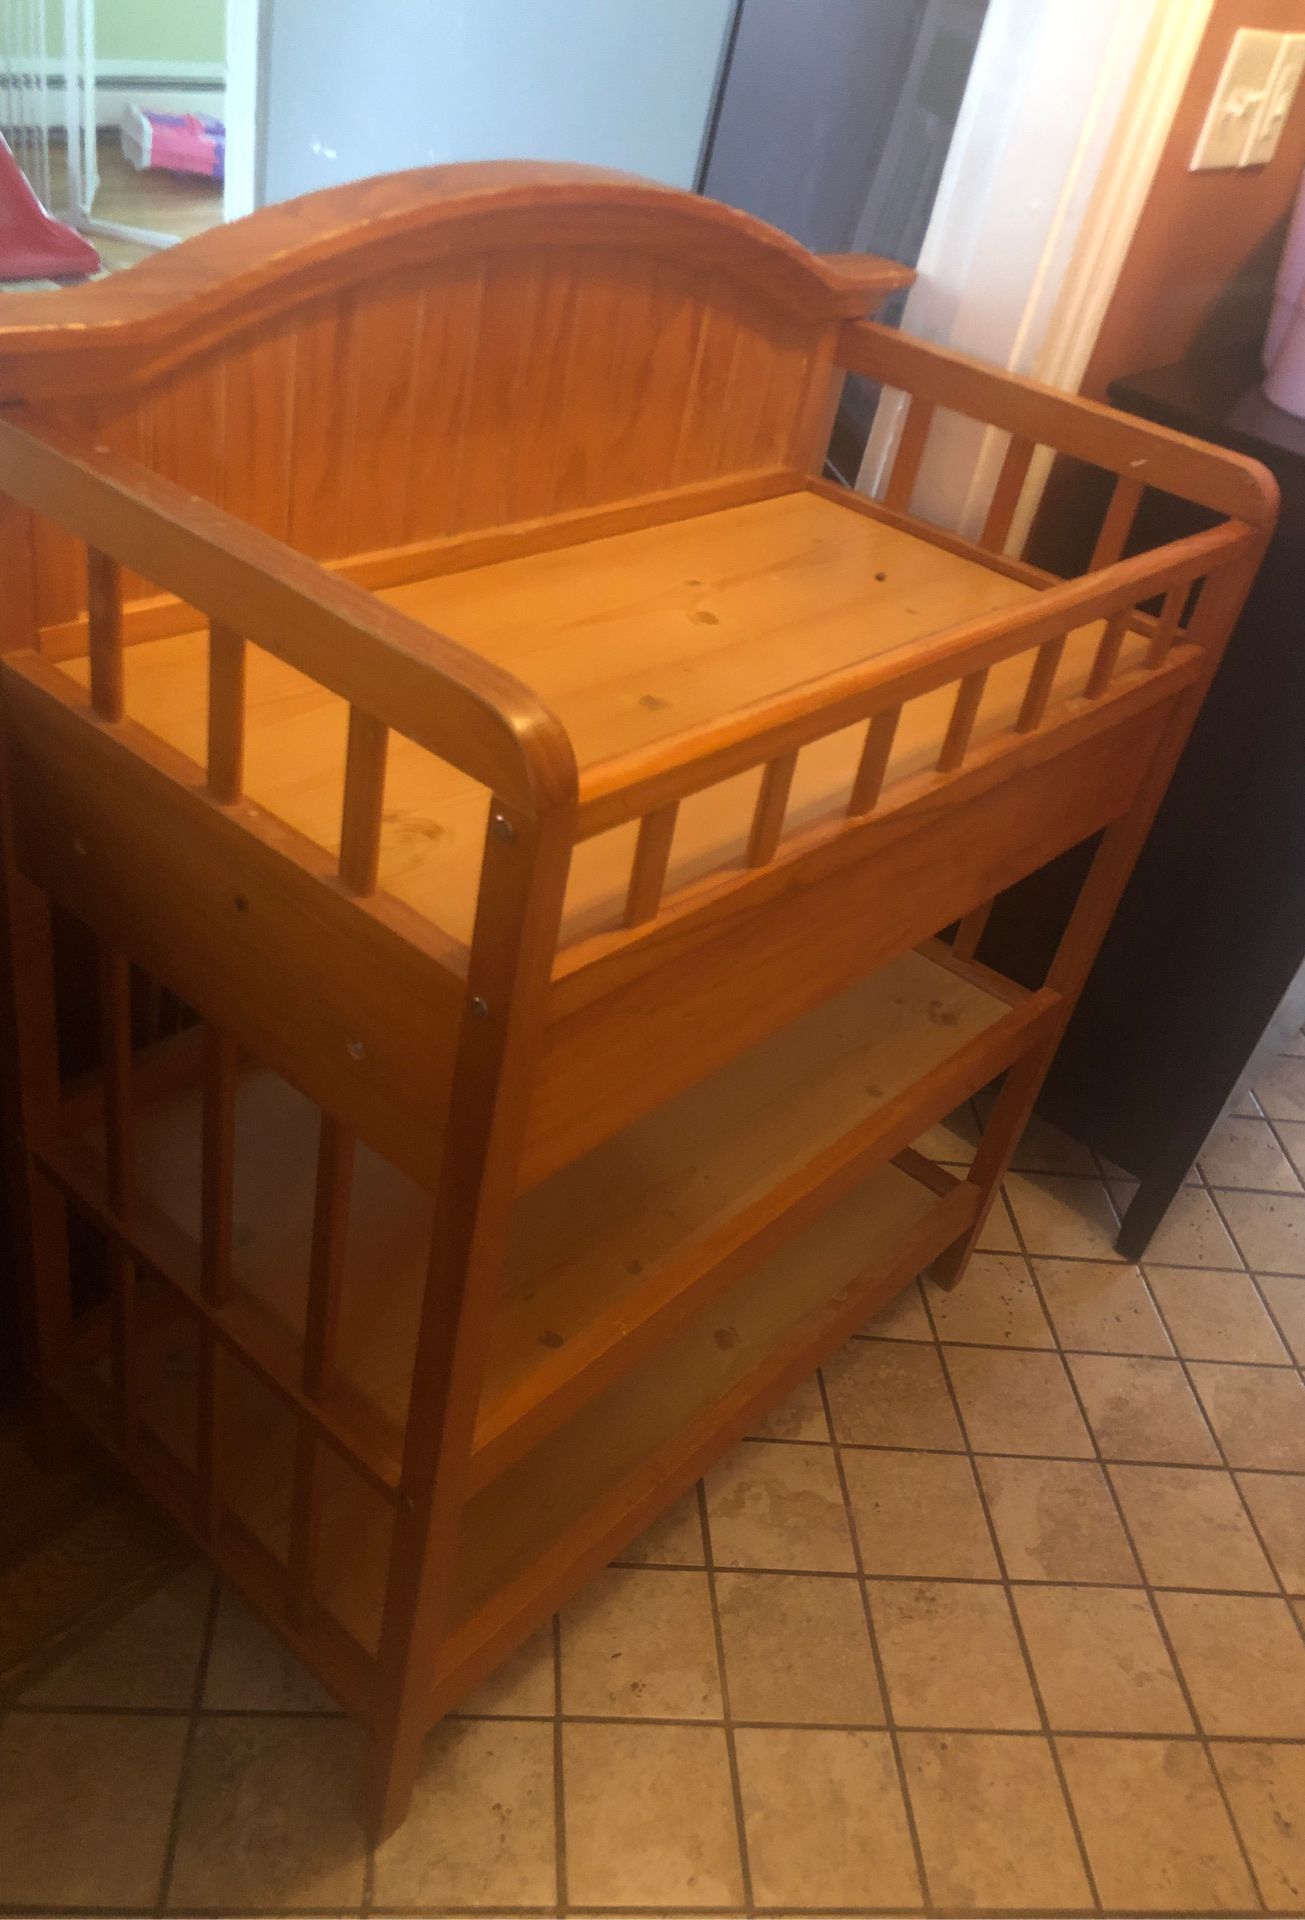 Changing table like new